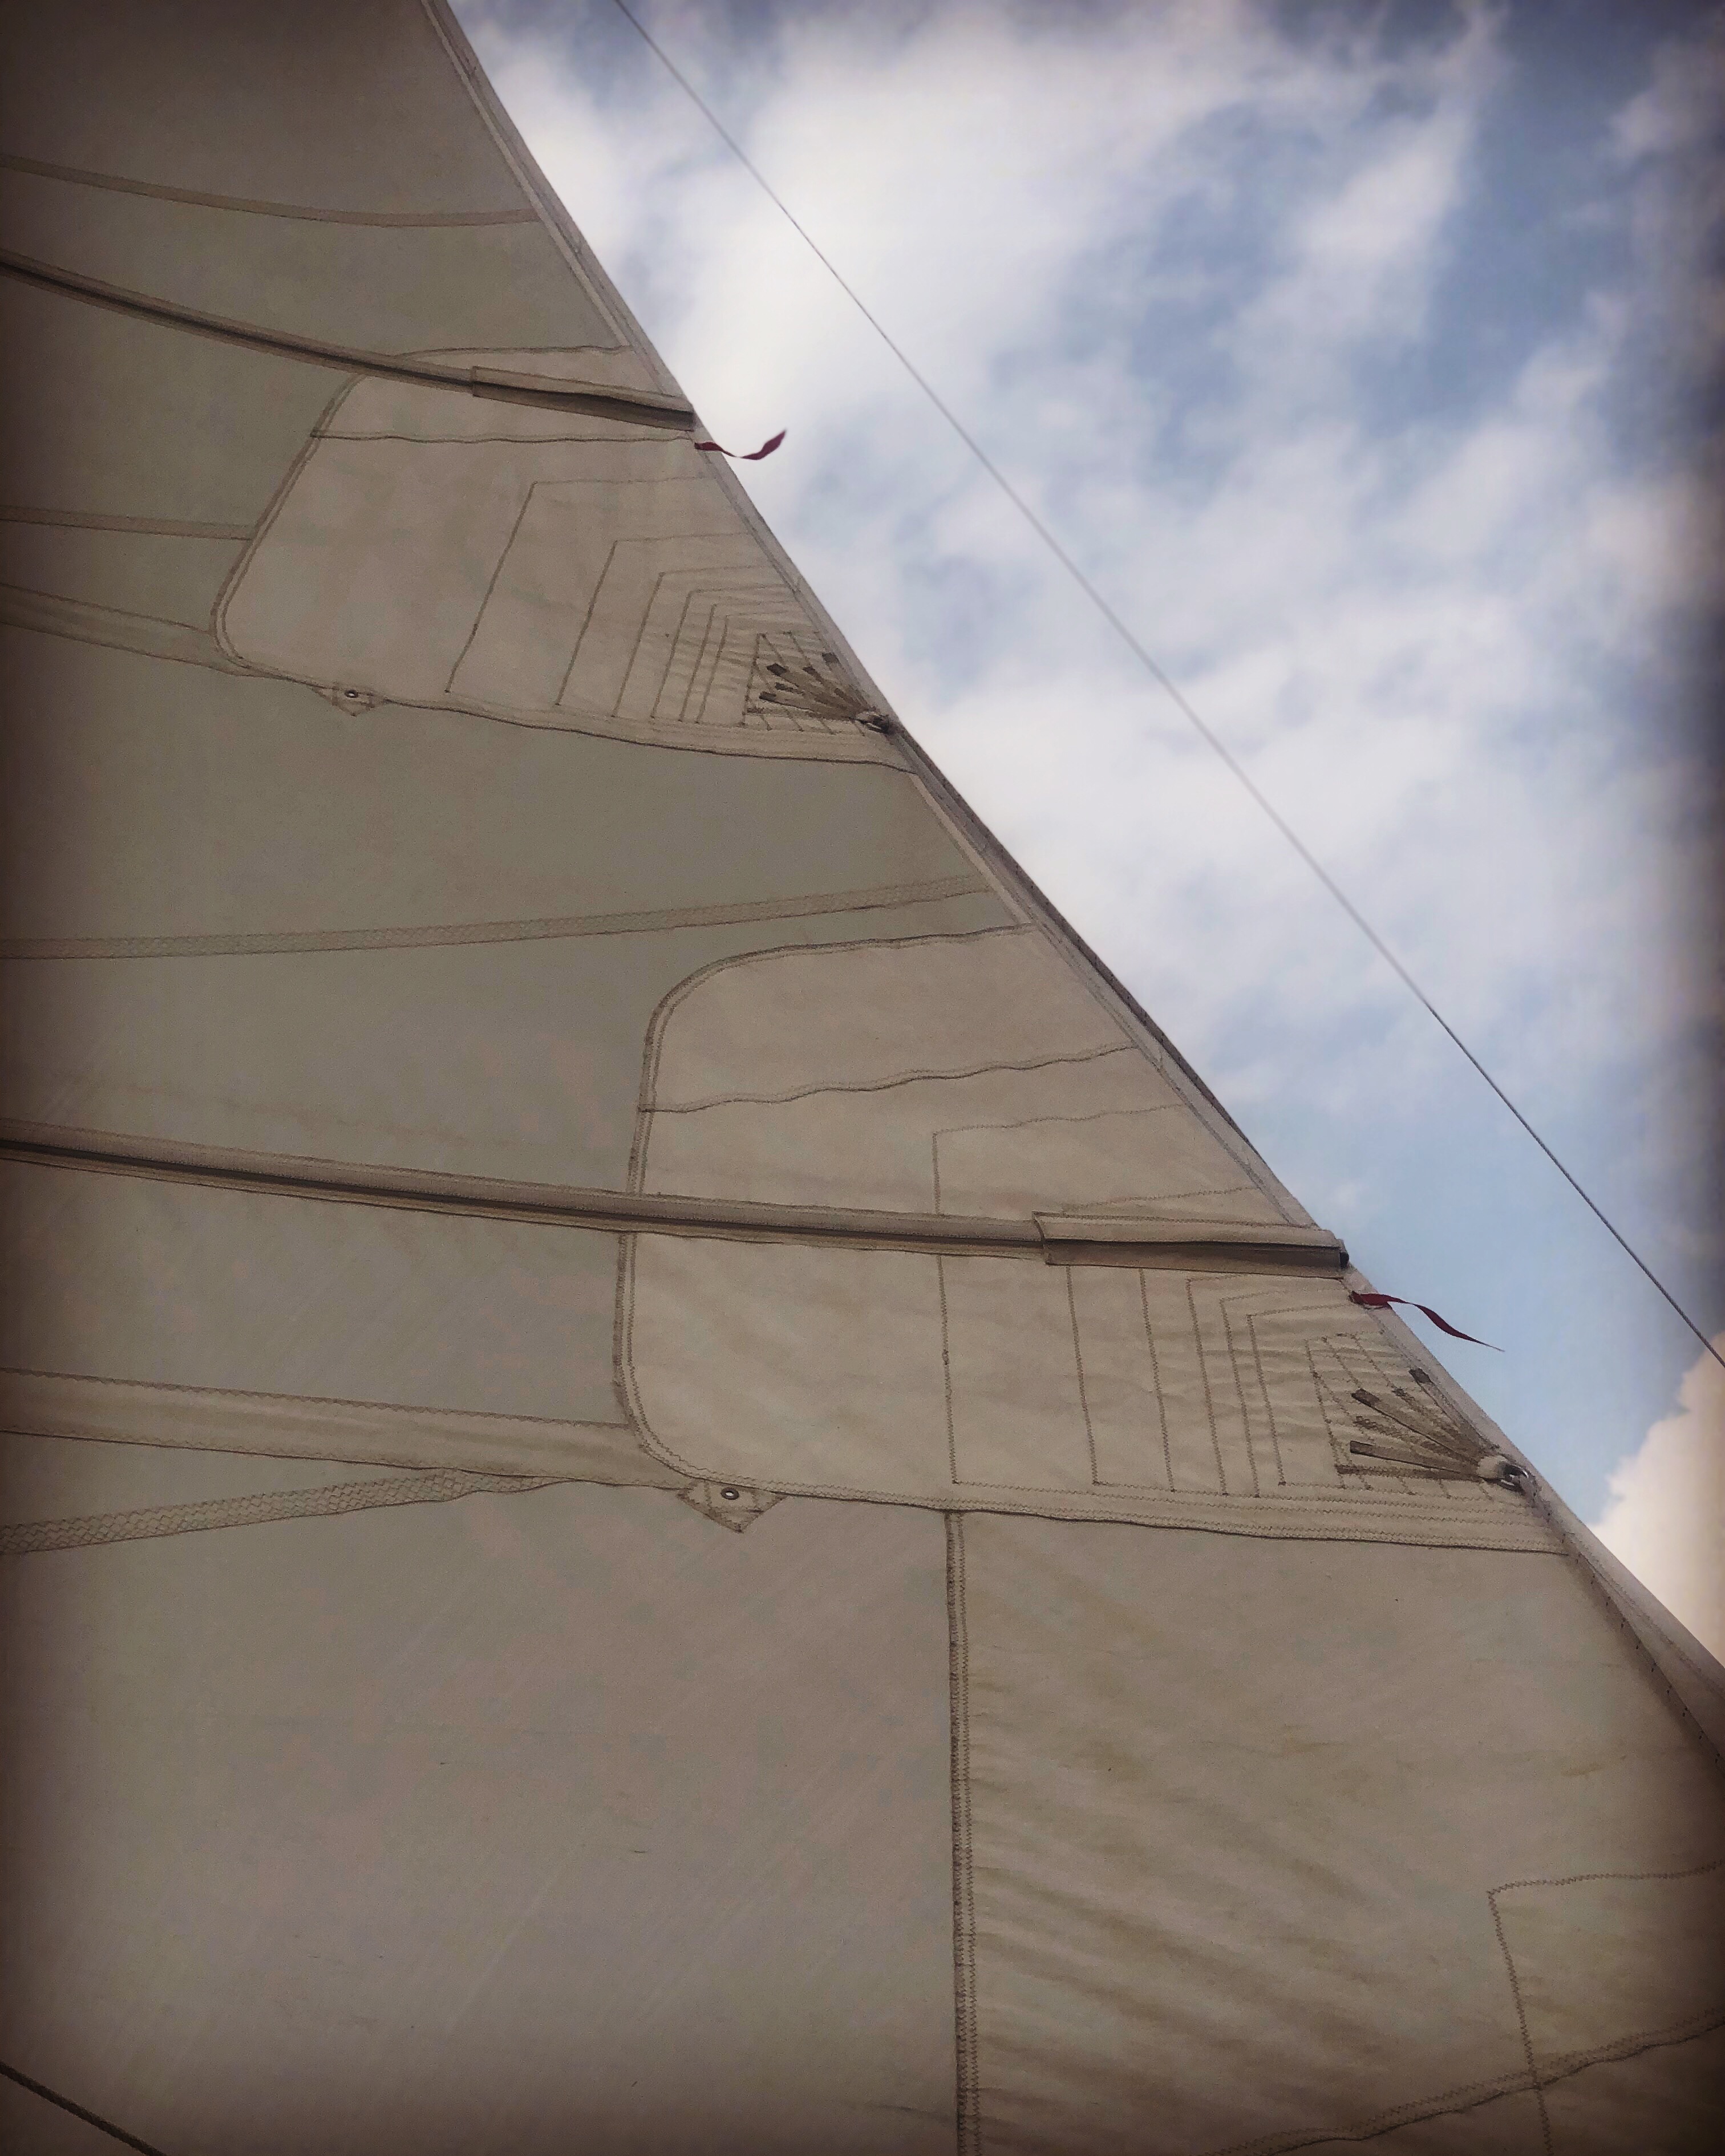 Schooner sail and blue sky with white clouds